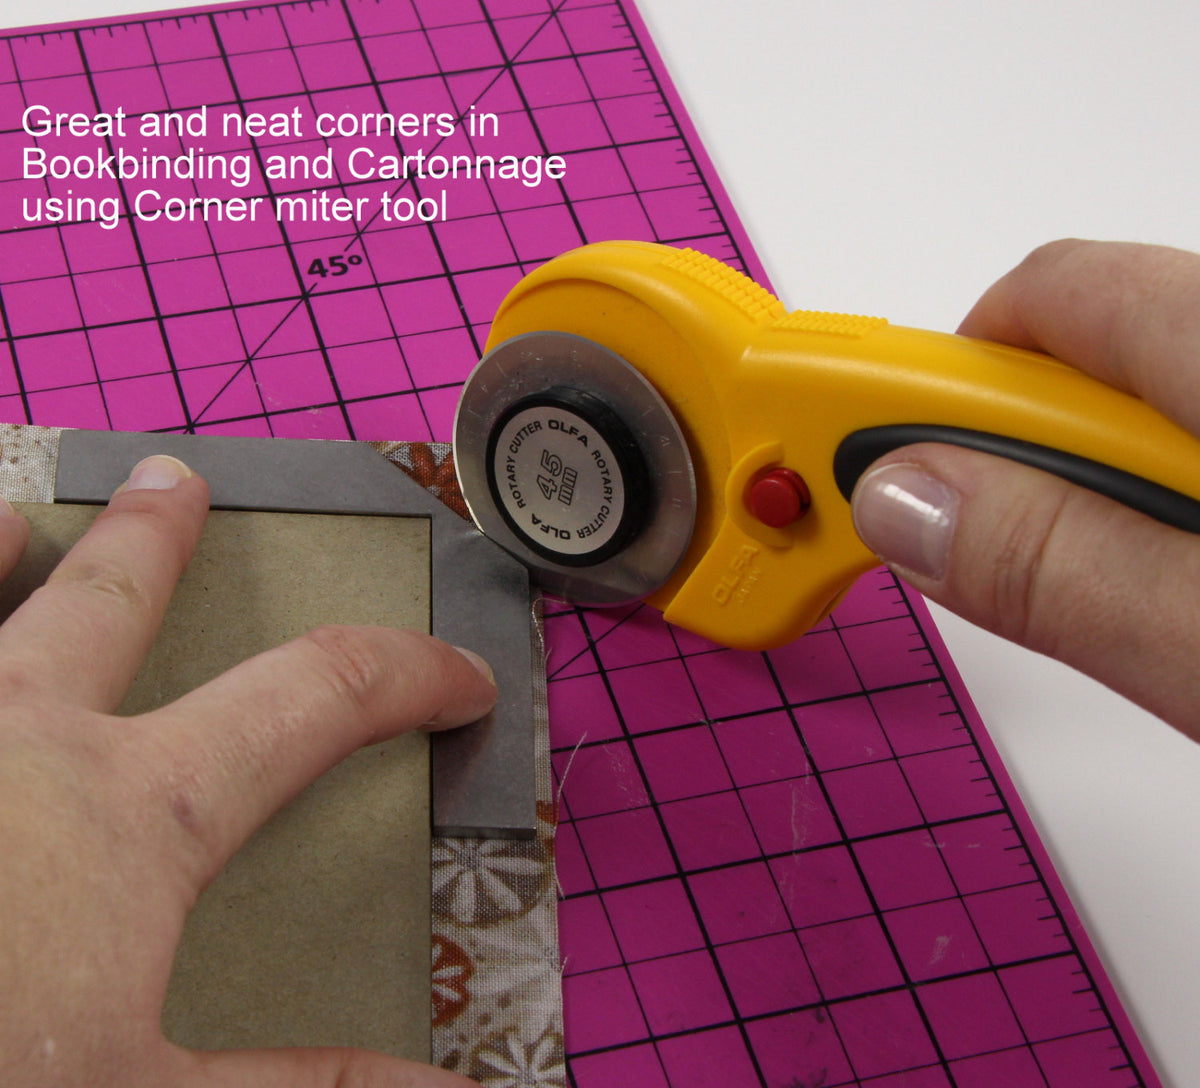 Corner miter tool, stainless steel corner tool for cartonnage, bookbinding and scrapbook - Colorway Arts